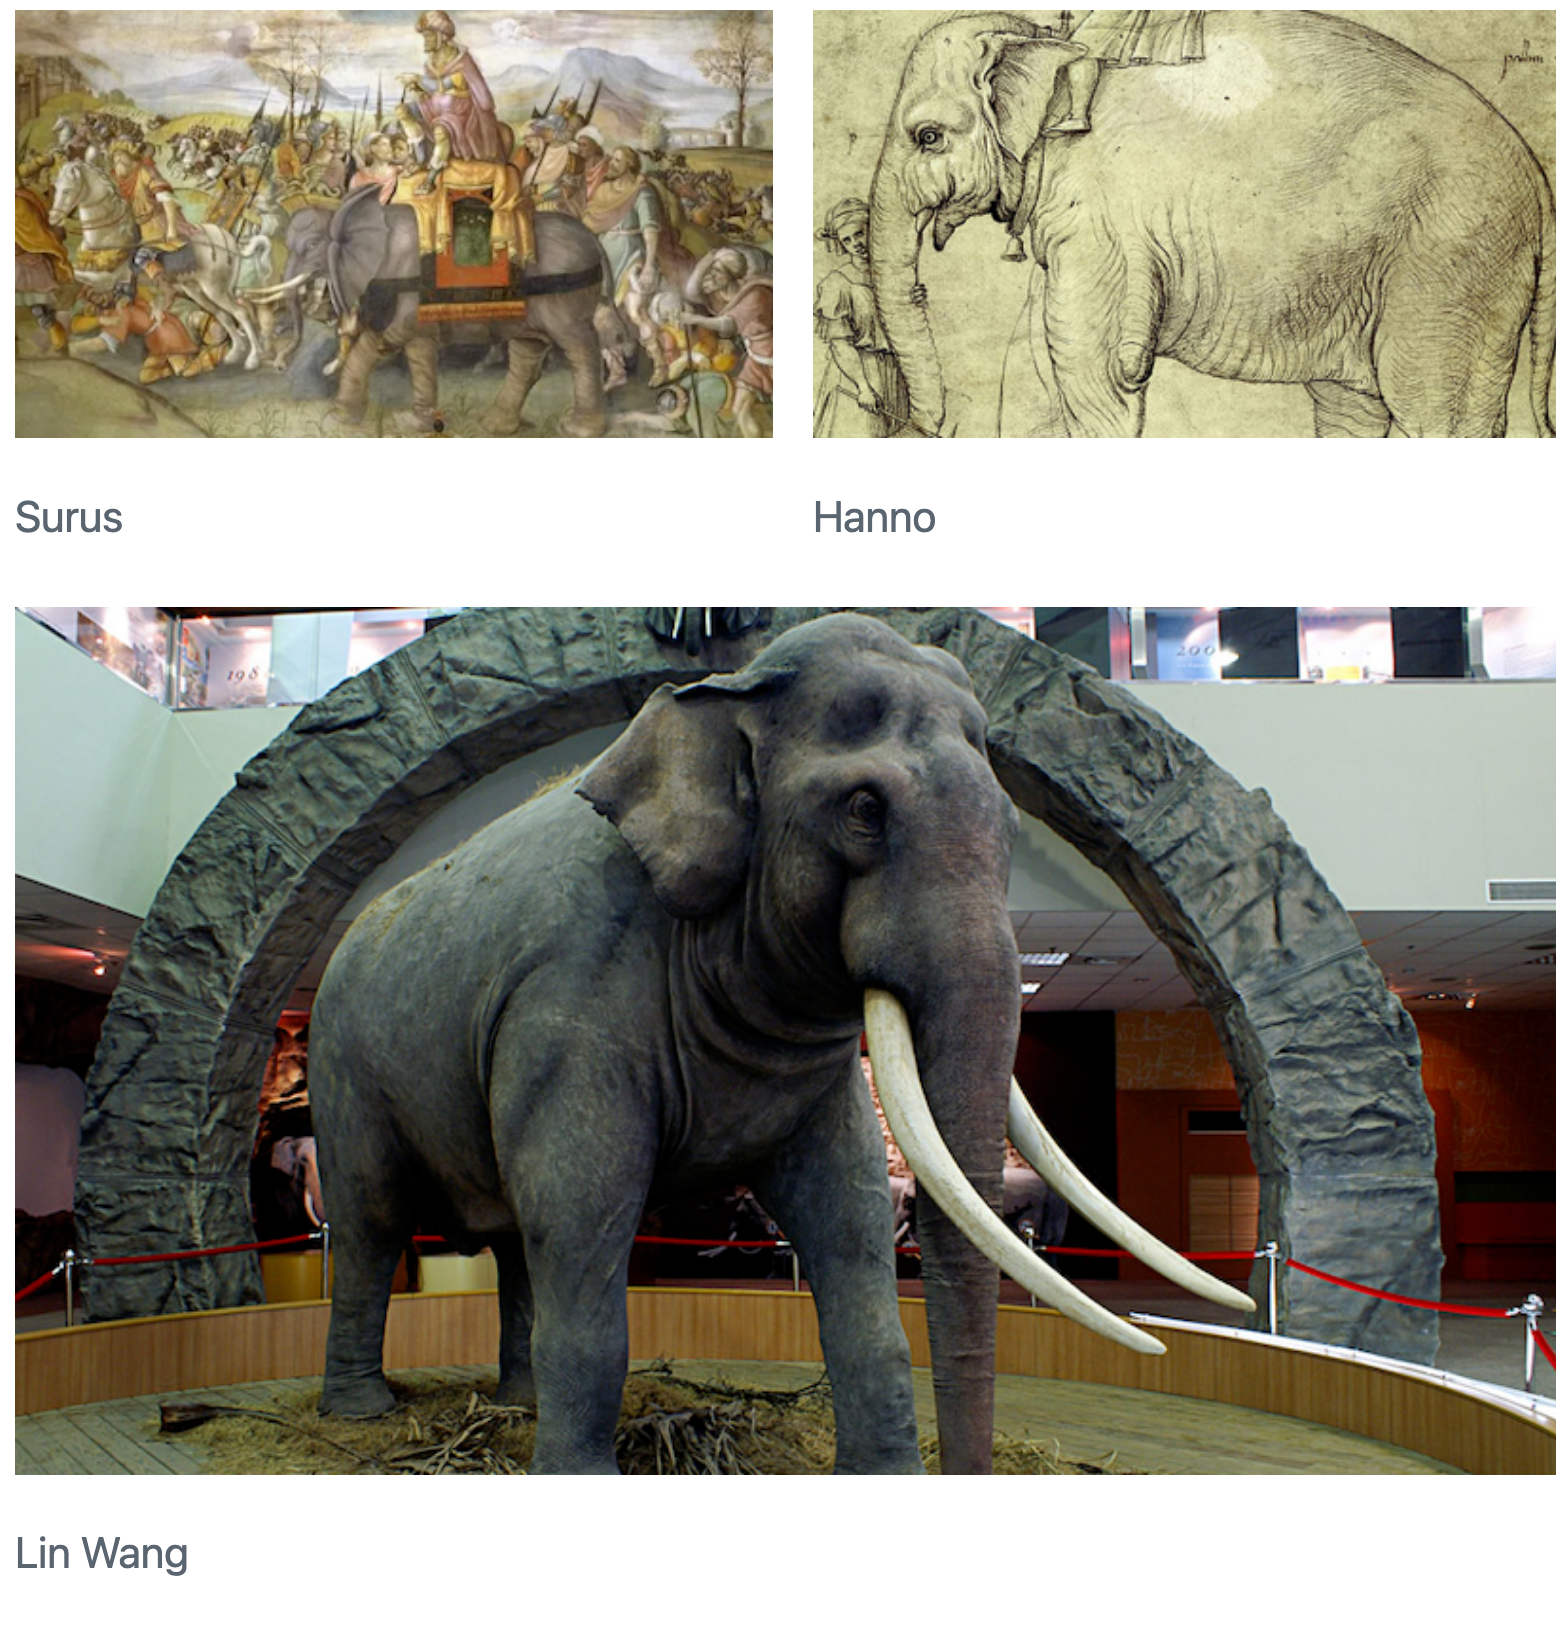 Three elephant pictures arranged such that two pictures are side-by-side in the first row, and the third picture is underneath both of these. The picture on the left in the first row is captioned 'Surus' and the picture on the right is captioned 'Hanno'. The picture underneath these two is captioned 'Lin Wang' and is as as wide and tall as the other two put together.